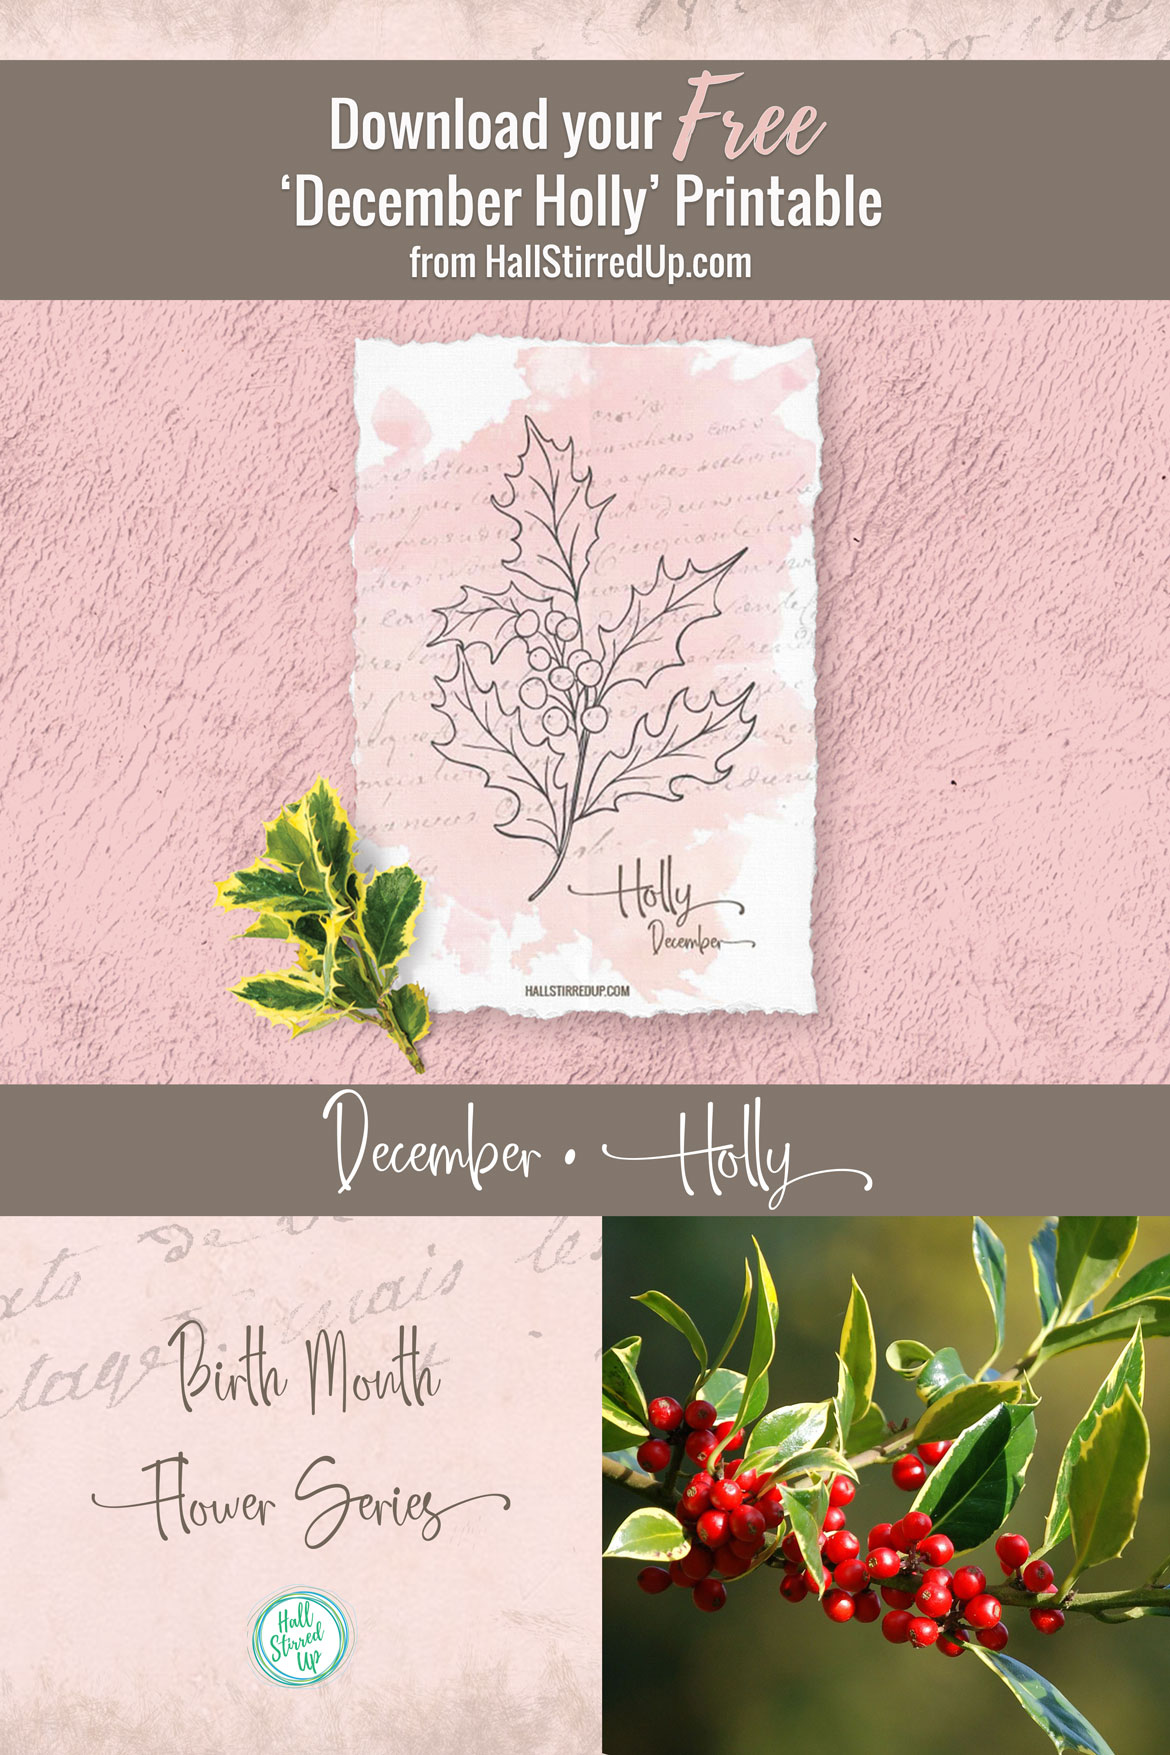 Festive Holly is December's Birth Flower Includes free printable